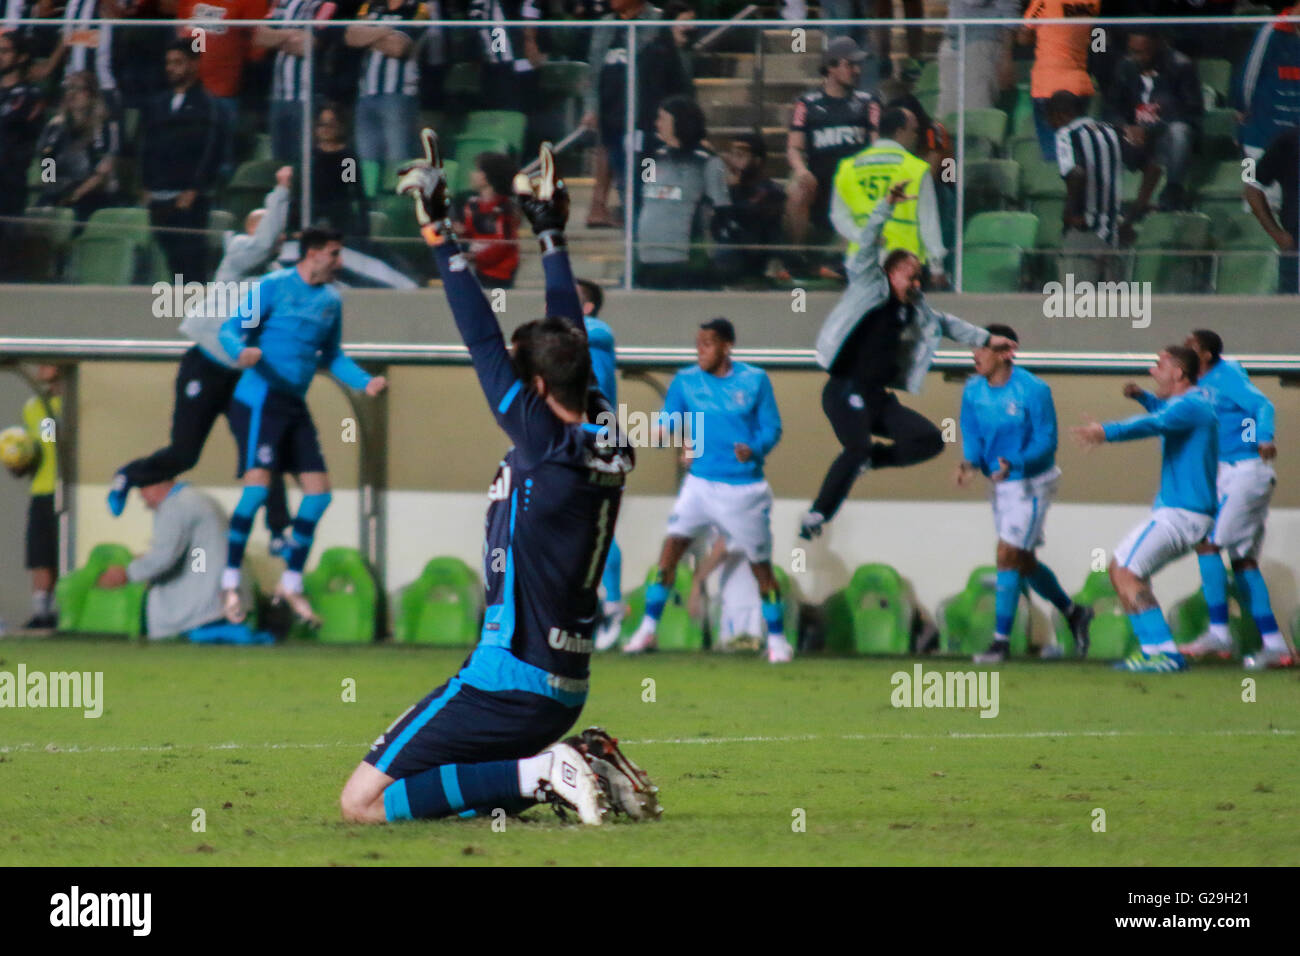 BELO HORIZONTE, MG - 26/05/2016: ATHLETIC MG X GR?MIO RS - Marcelo Grohe, Gremio goalkeeper celebrates the third goal of the team, scored by Luan during Atletico MG x Gr?mio match valid for the third round of the Brazilian Championship 2016 held Arena Independence. (Photo: Dudu Macedo / FotoArena). Stock Photo